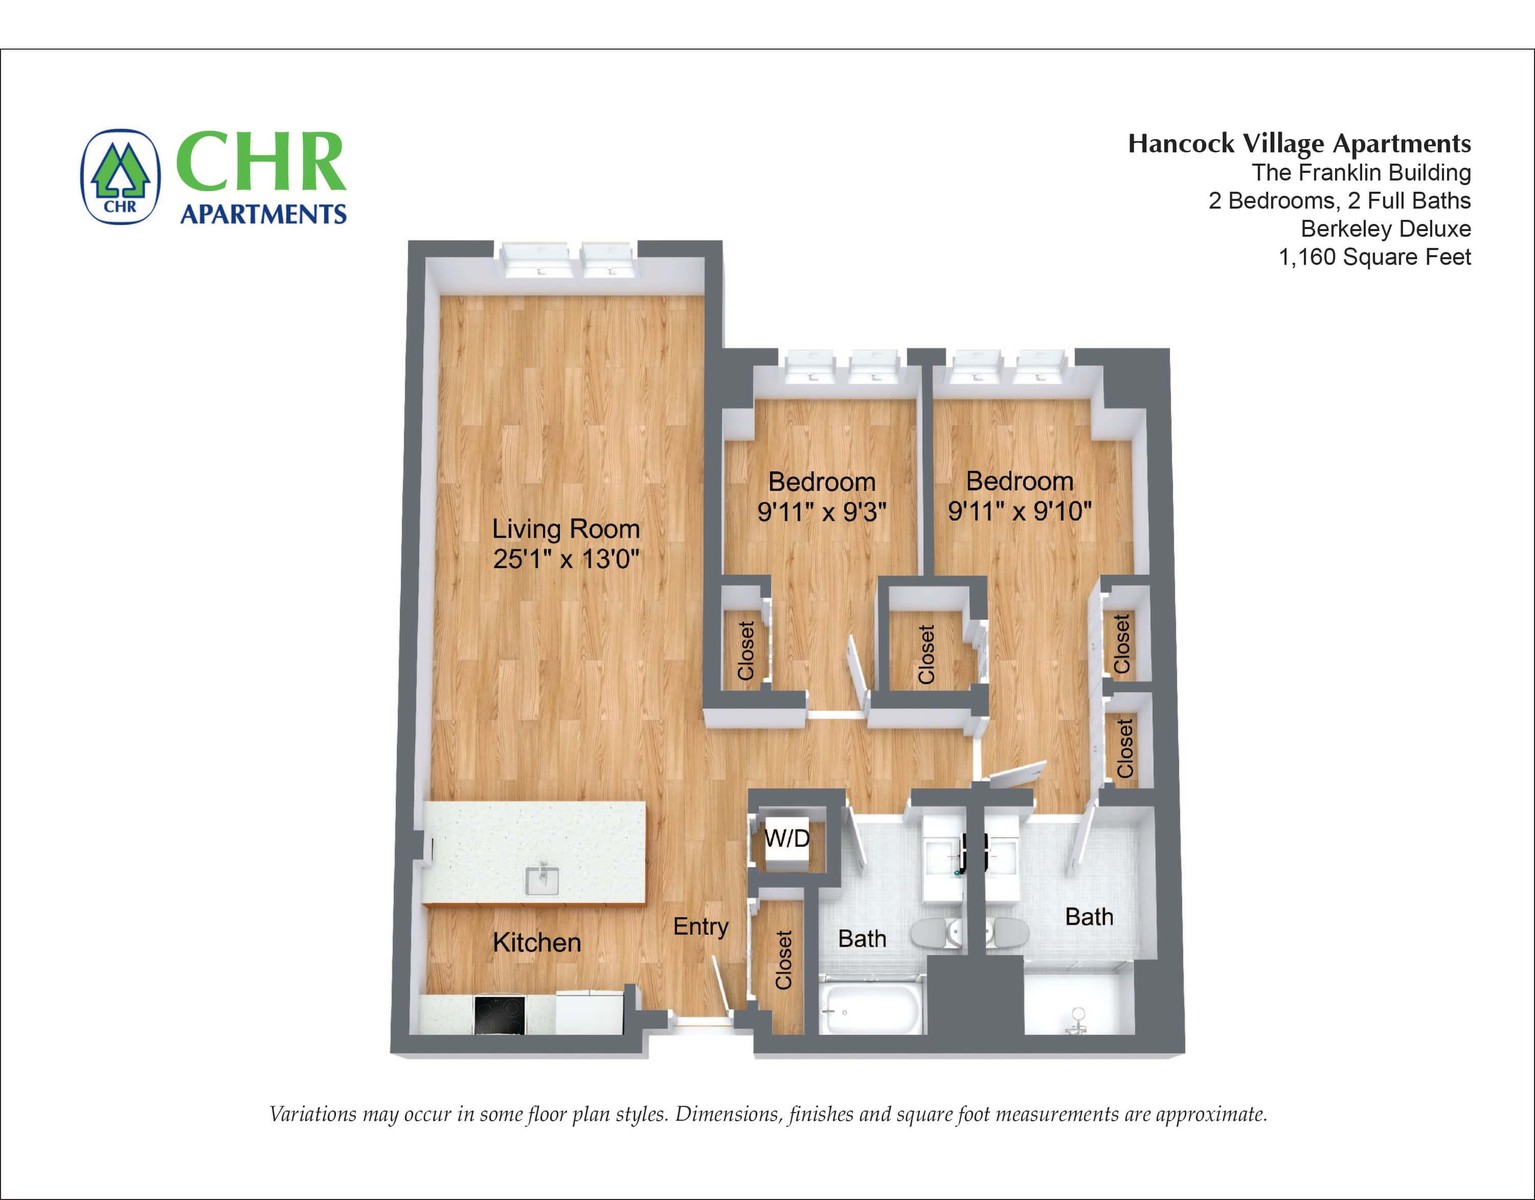 Two Bedroom - 1160 Square Feet